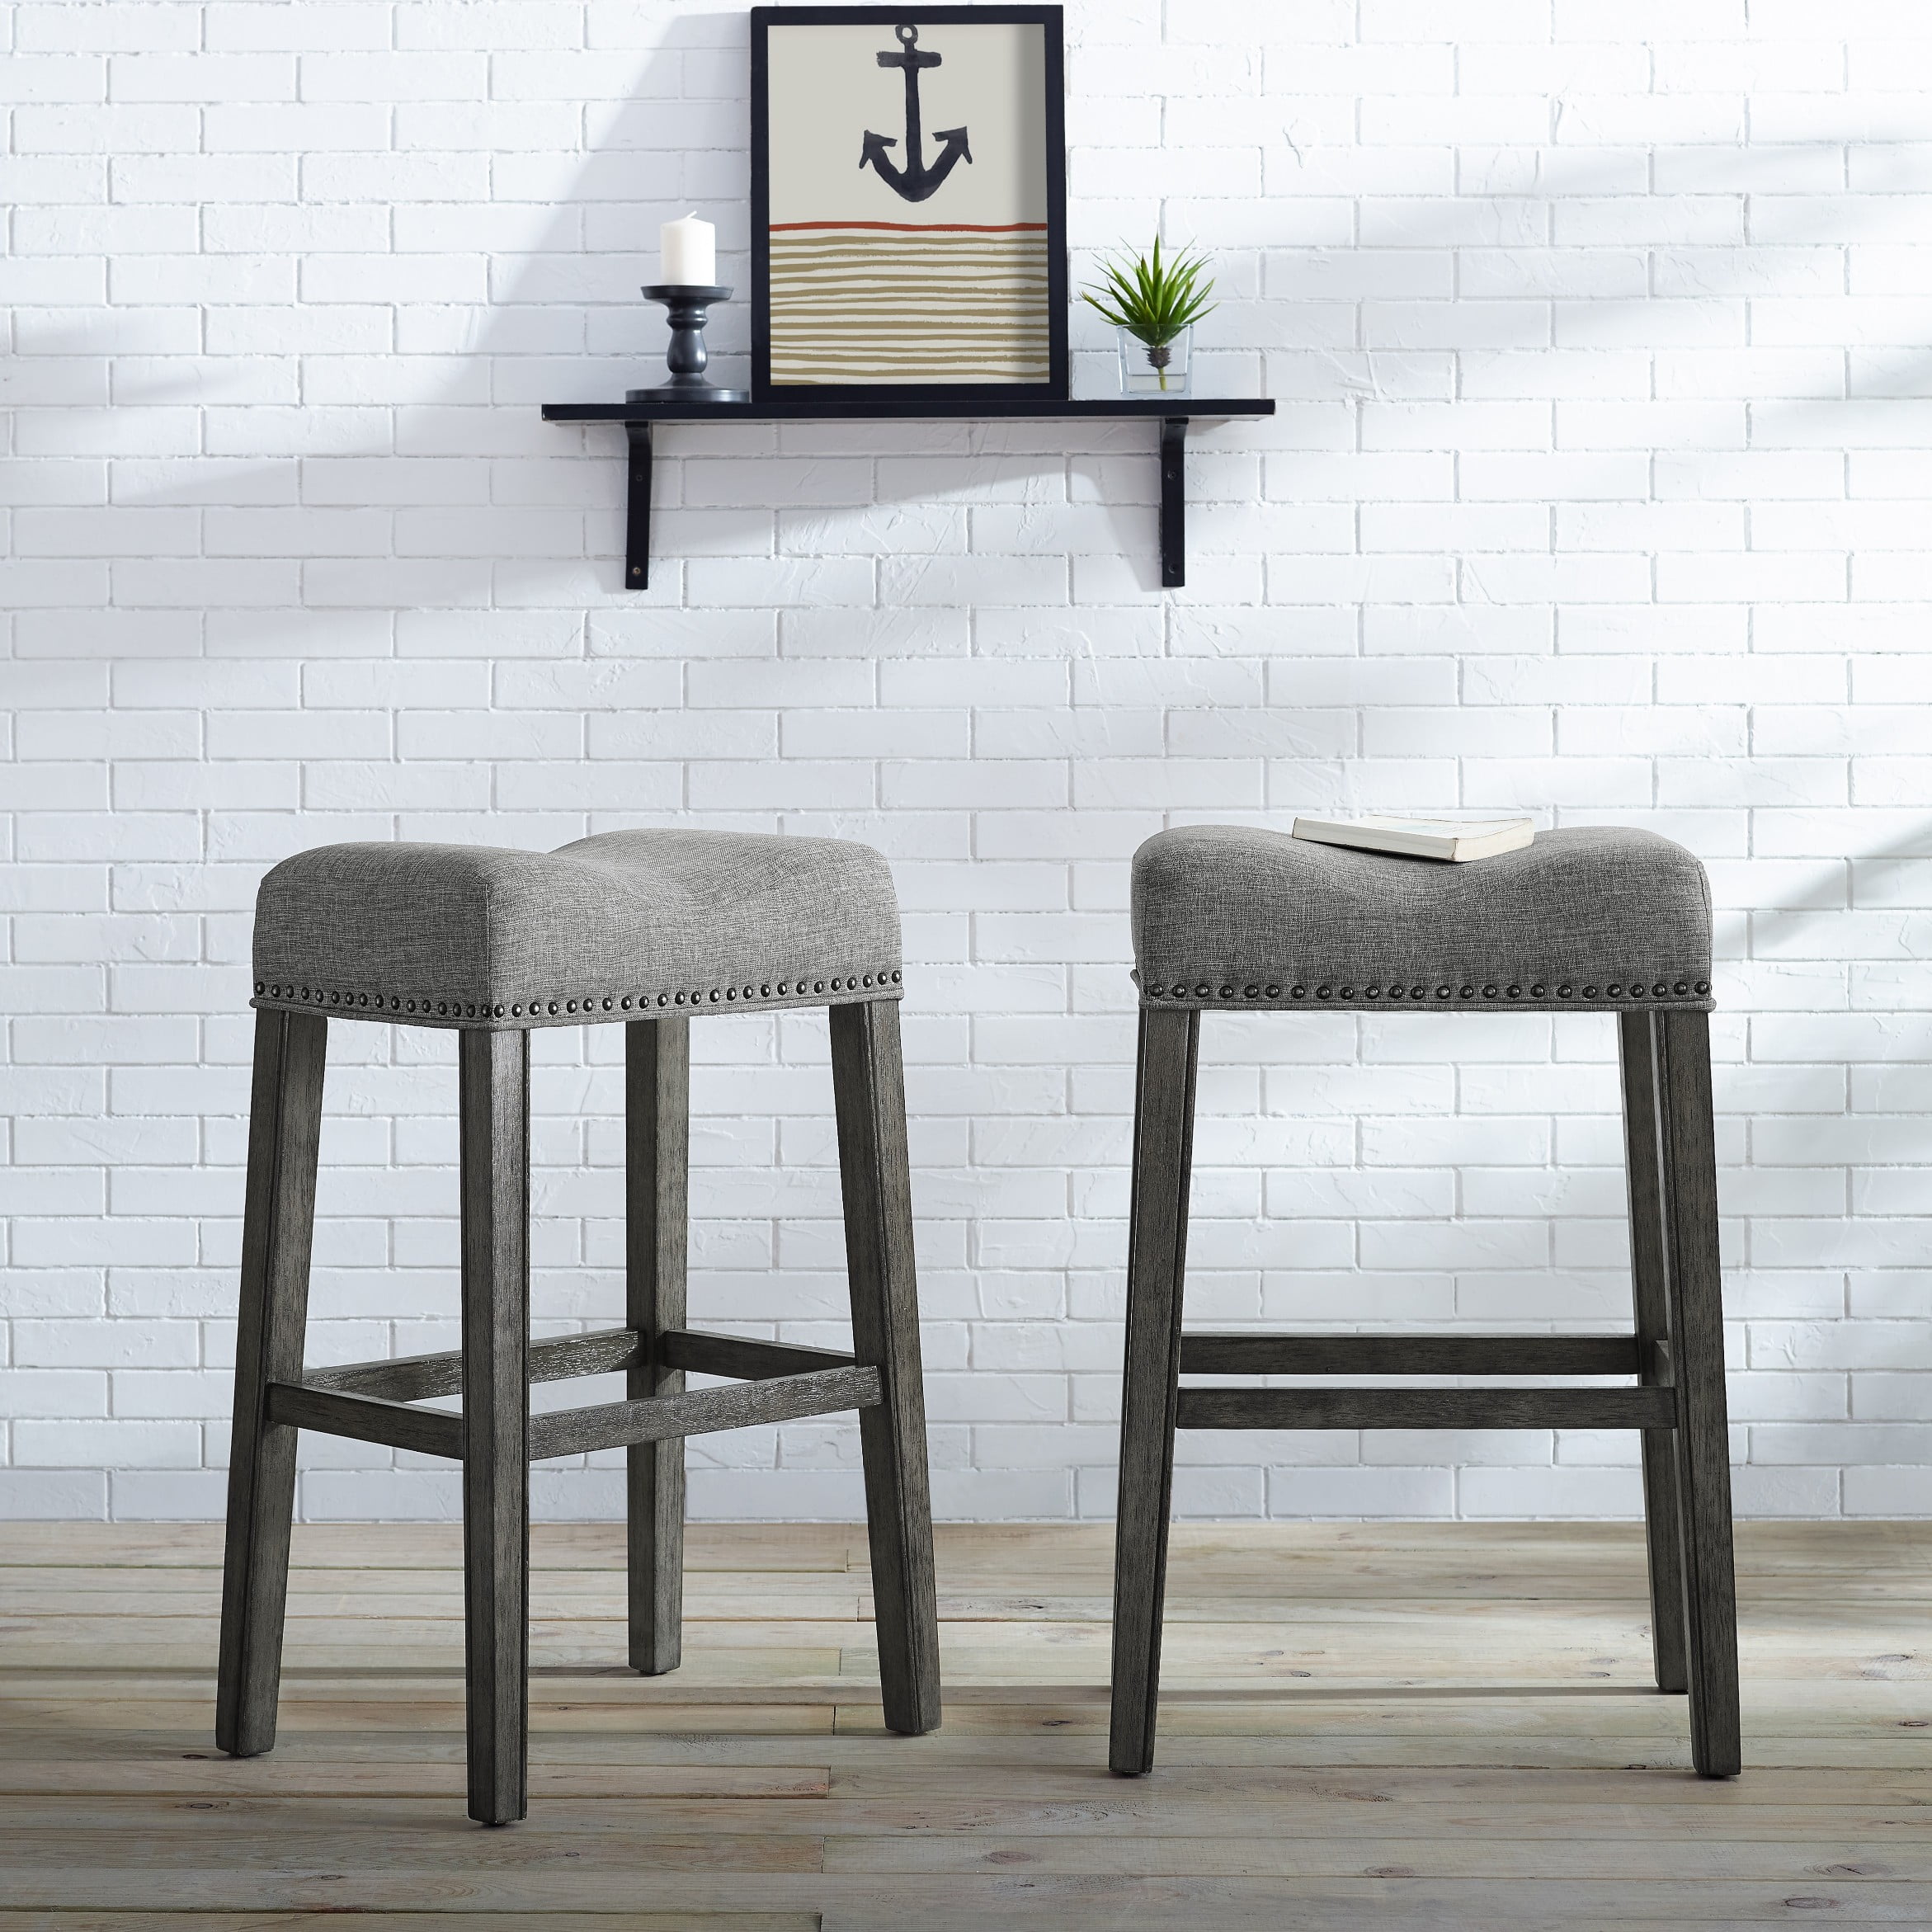 Photo 1 of Roundhill CoCo Upholstered Backless Saddle Seat Bar Stools 29 height Set of 2, Gray